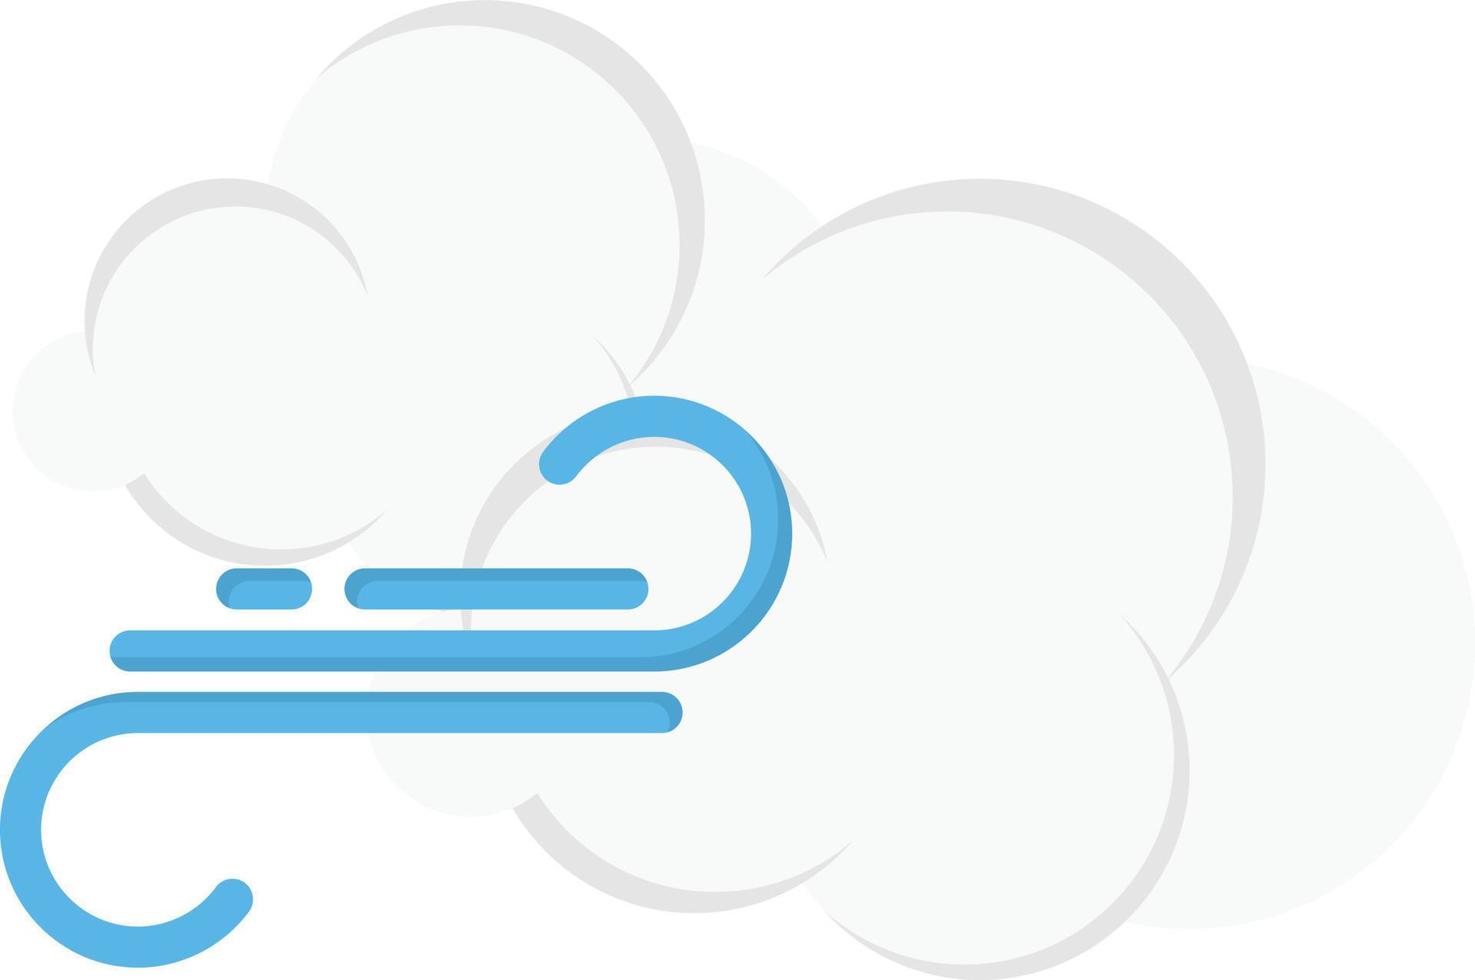 cloud wind vector illustration on a background.Premium quality symbols.vector icons for concept and graphic design.